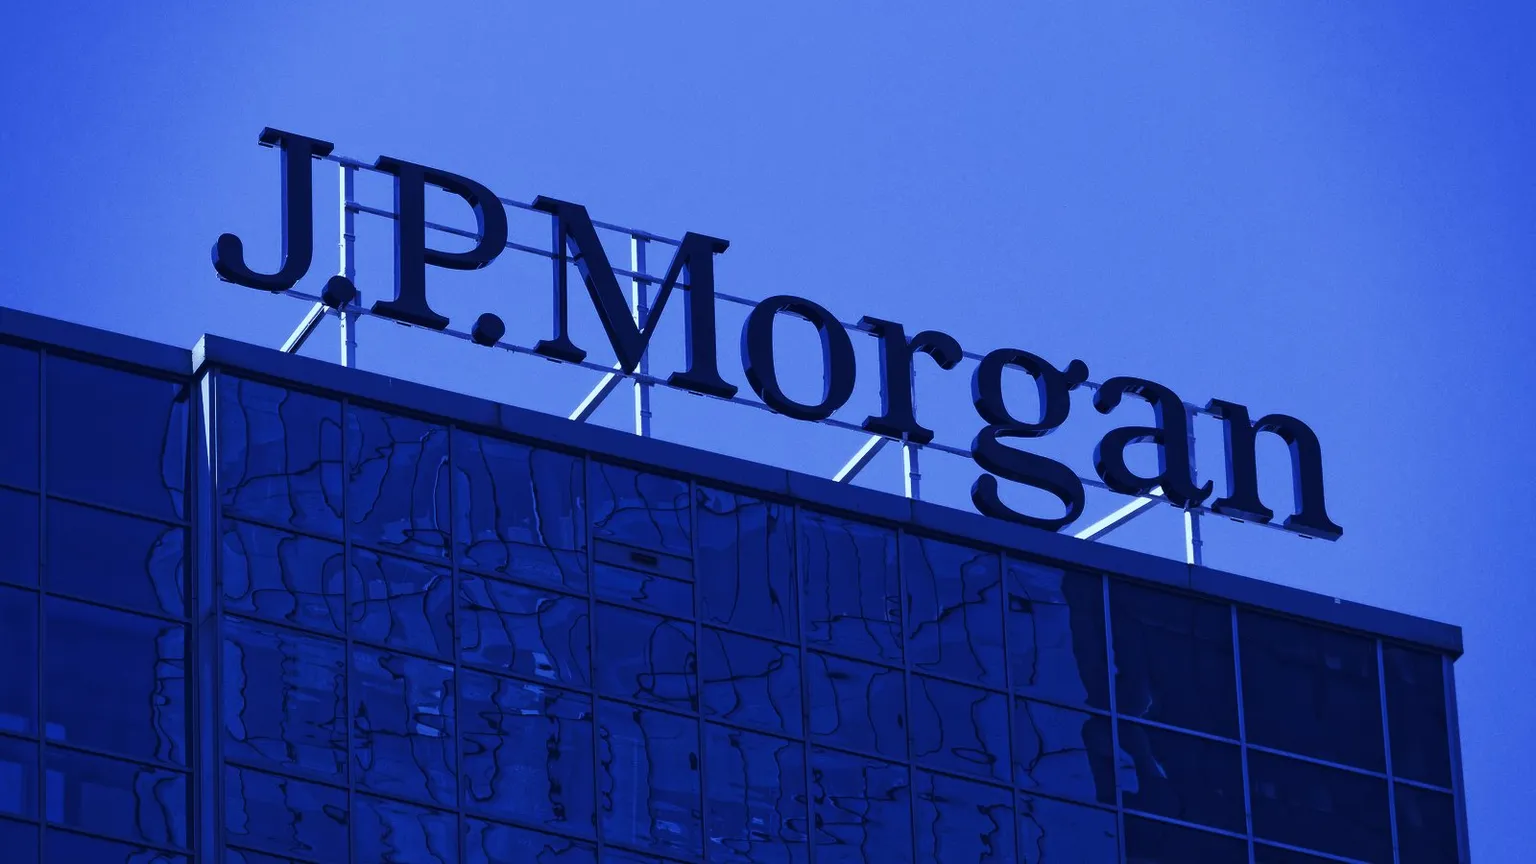 The subsidiary of JP Morgan has returned money to investors after it overcharged them for buying crypto. Image: Shutterstock